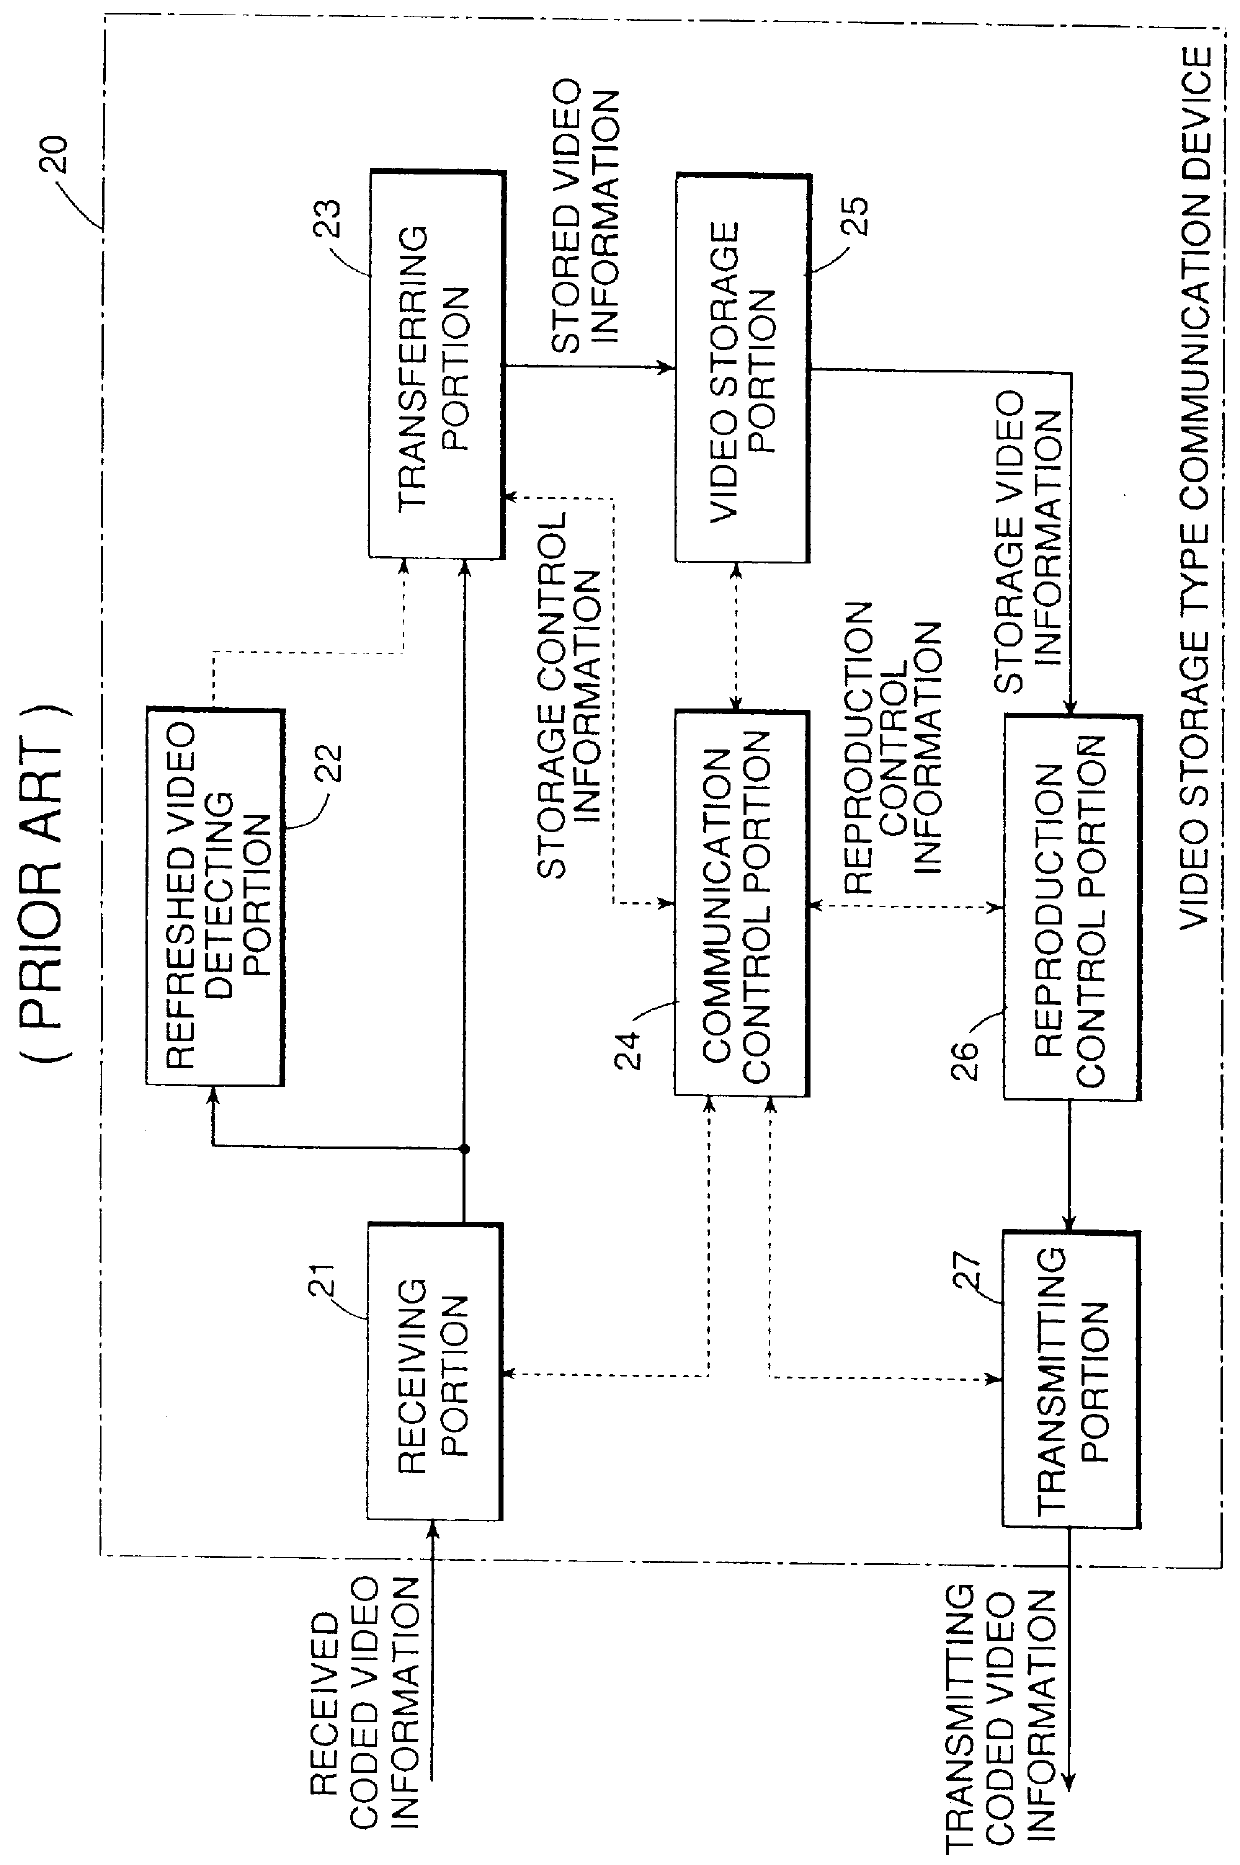 Video storage type communication device for selectively providing coded frames for selectable reproduction speed and mode according to type of a terminal device